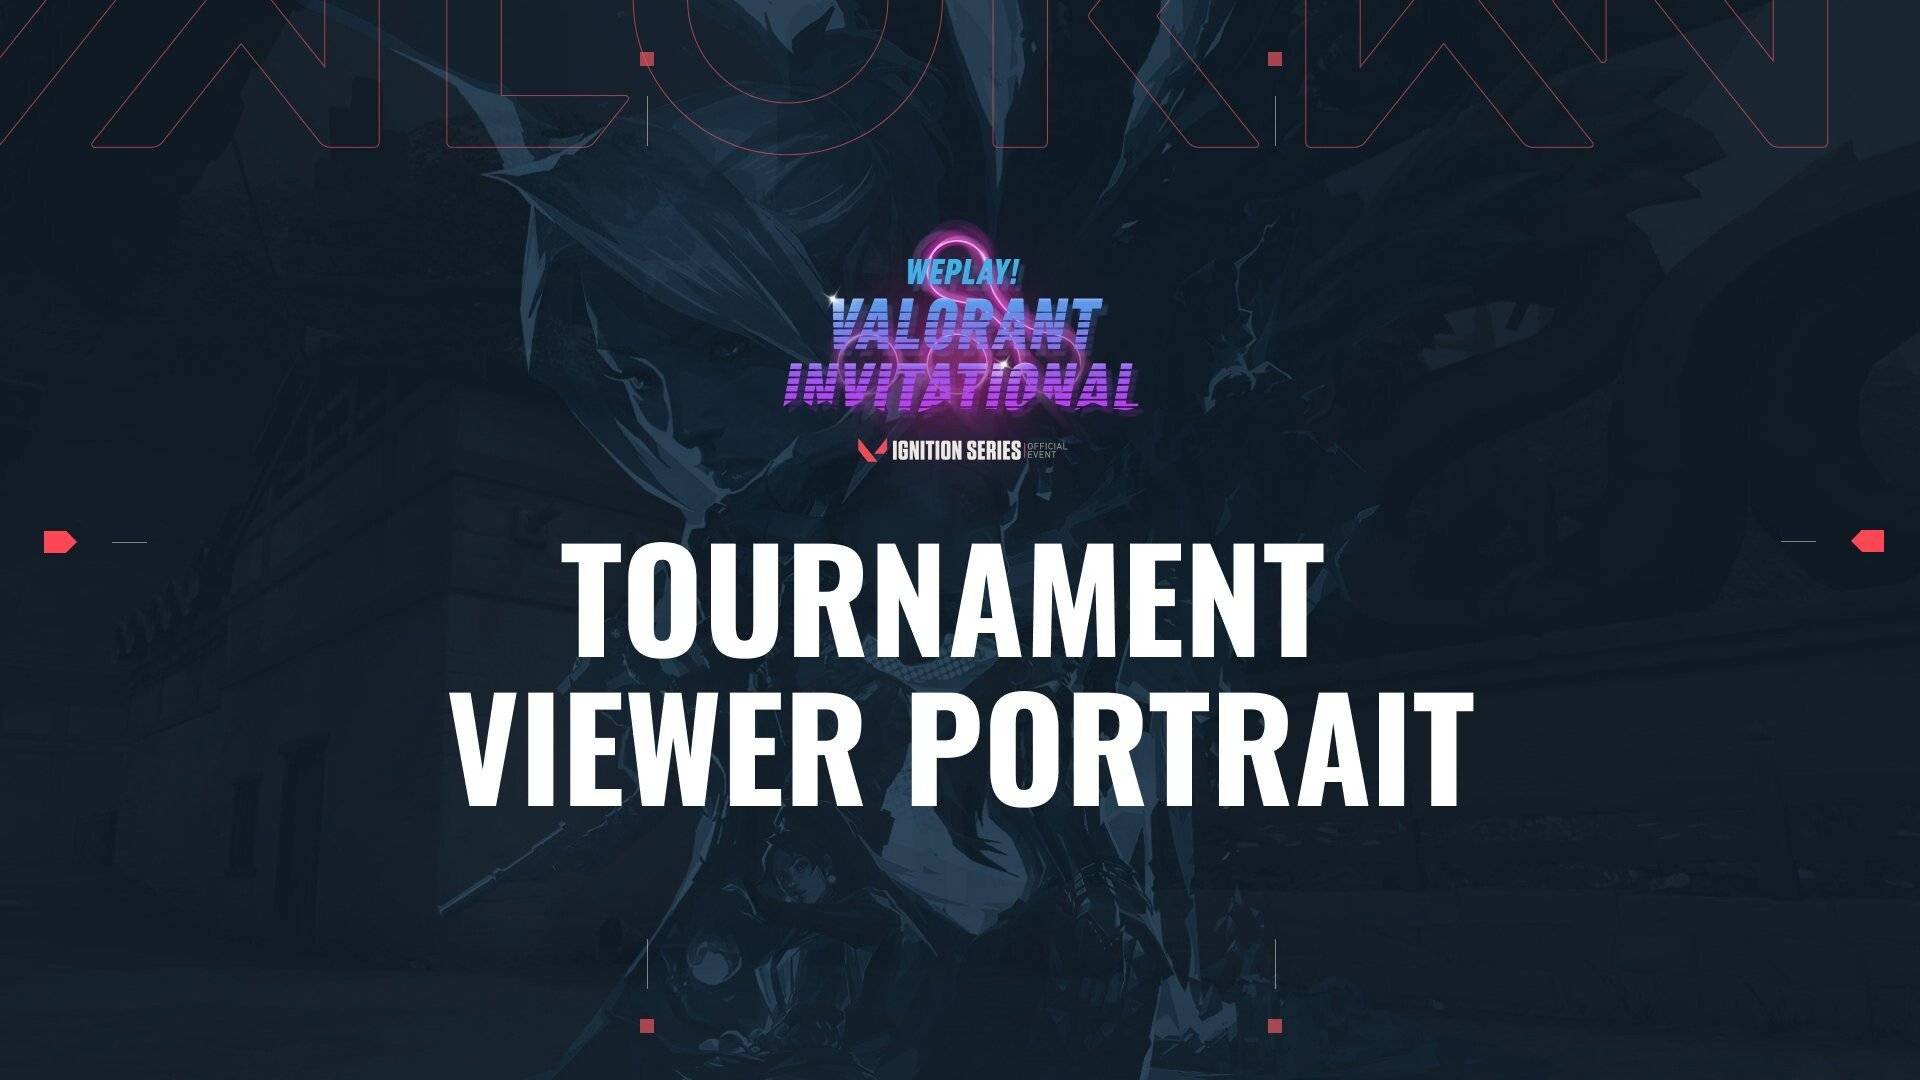 Introducing White Paper on WePlay! VALORANT Invitational Tournament Audience